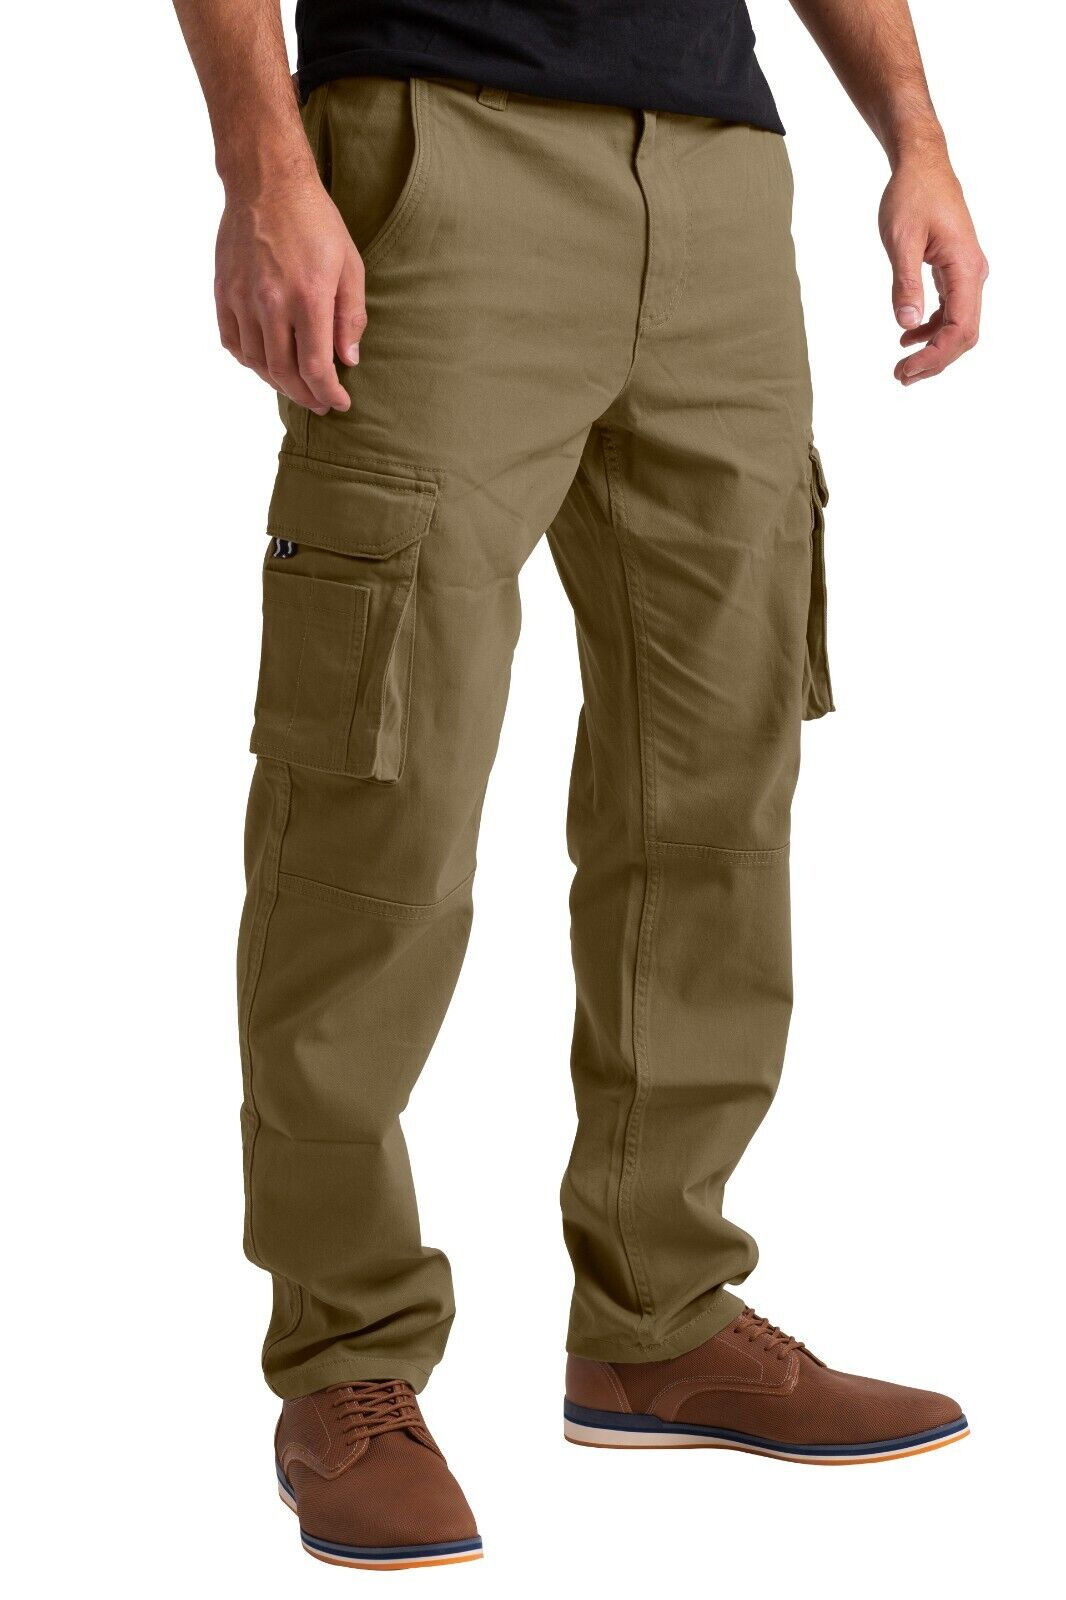 Timberland Squam Lake Cargo Trousers For Men In Green Green Size 38x34   Compare  Highcross Shopping Centre Leicester